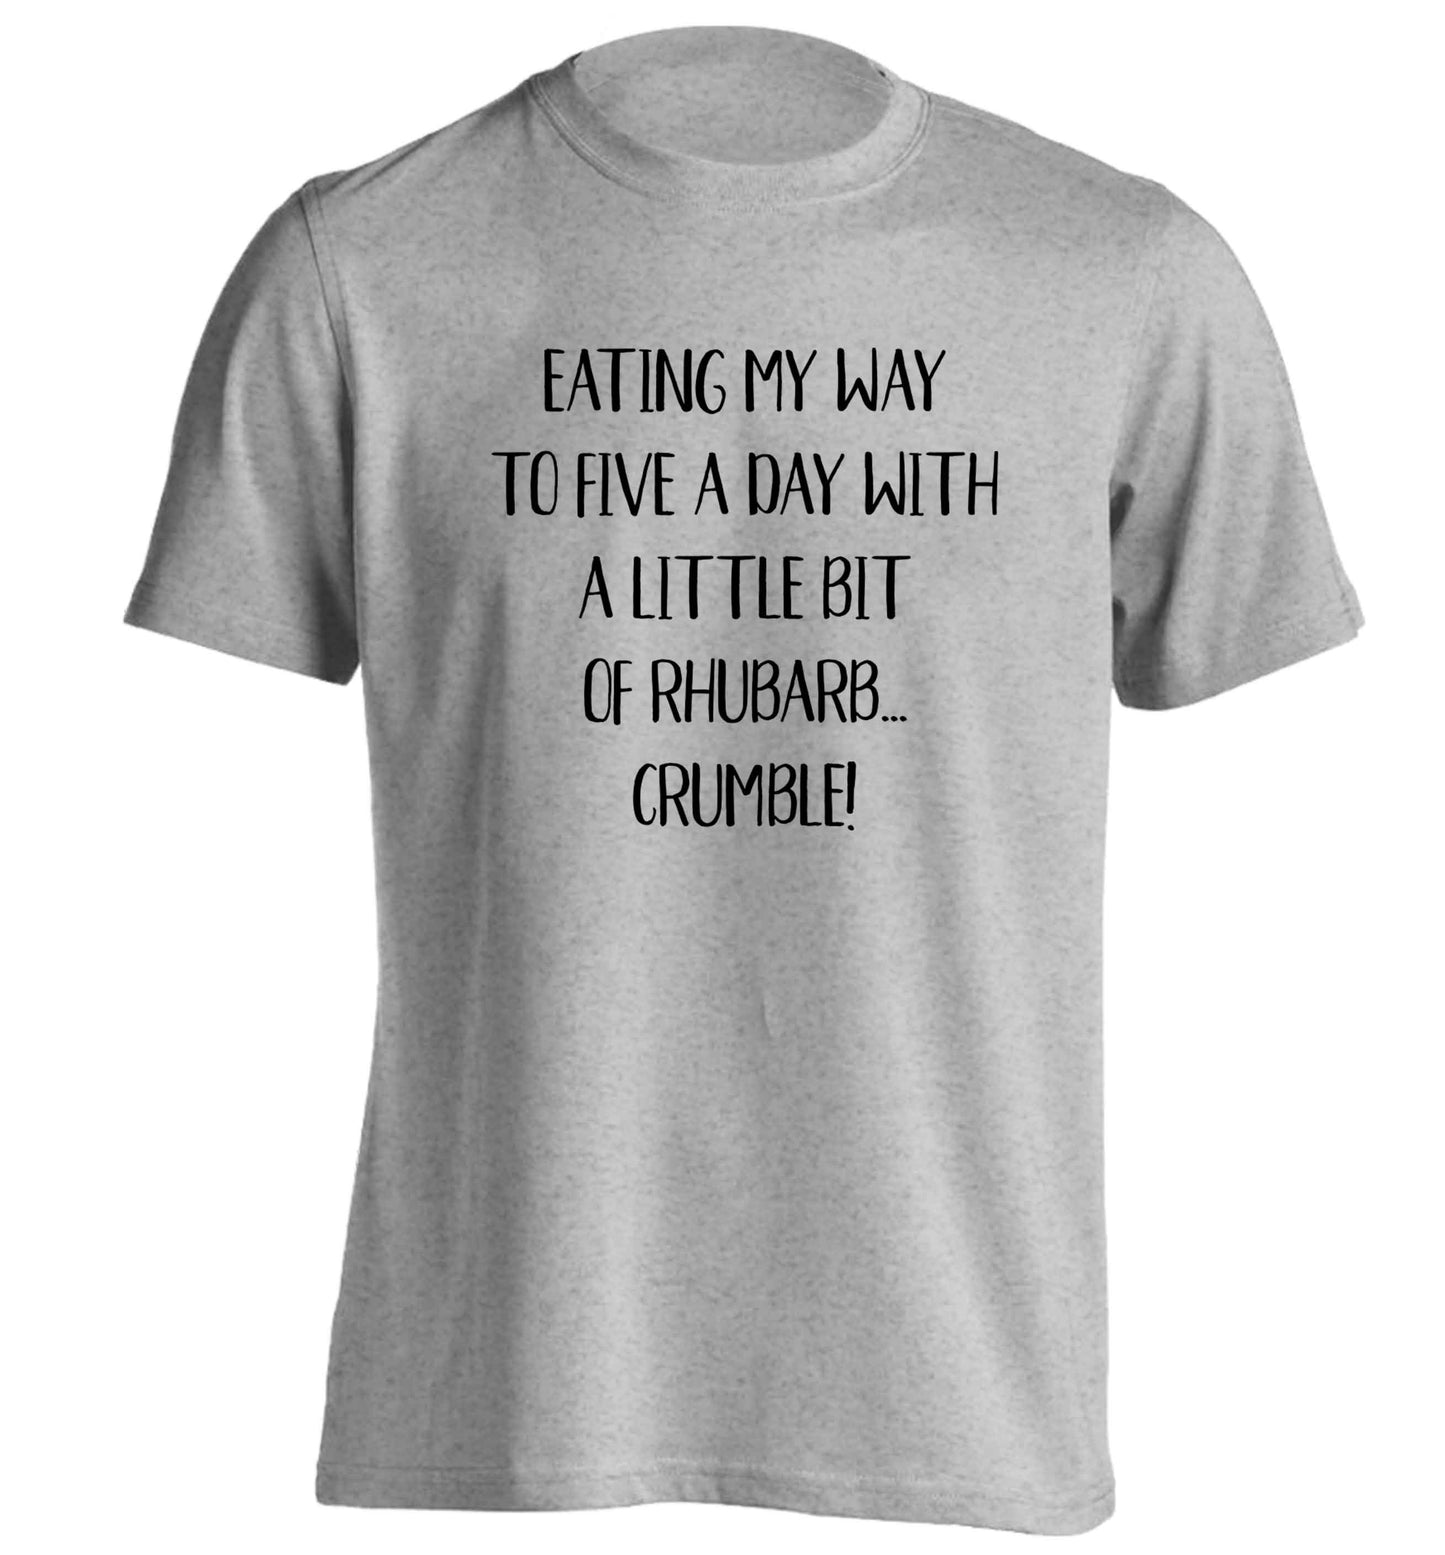 Eating my way to five a day with a little bit of rhubarb crumble adults unisex grey Tshirt 2XL